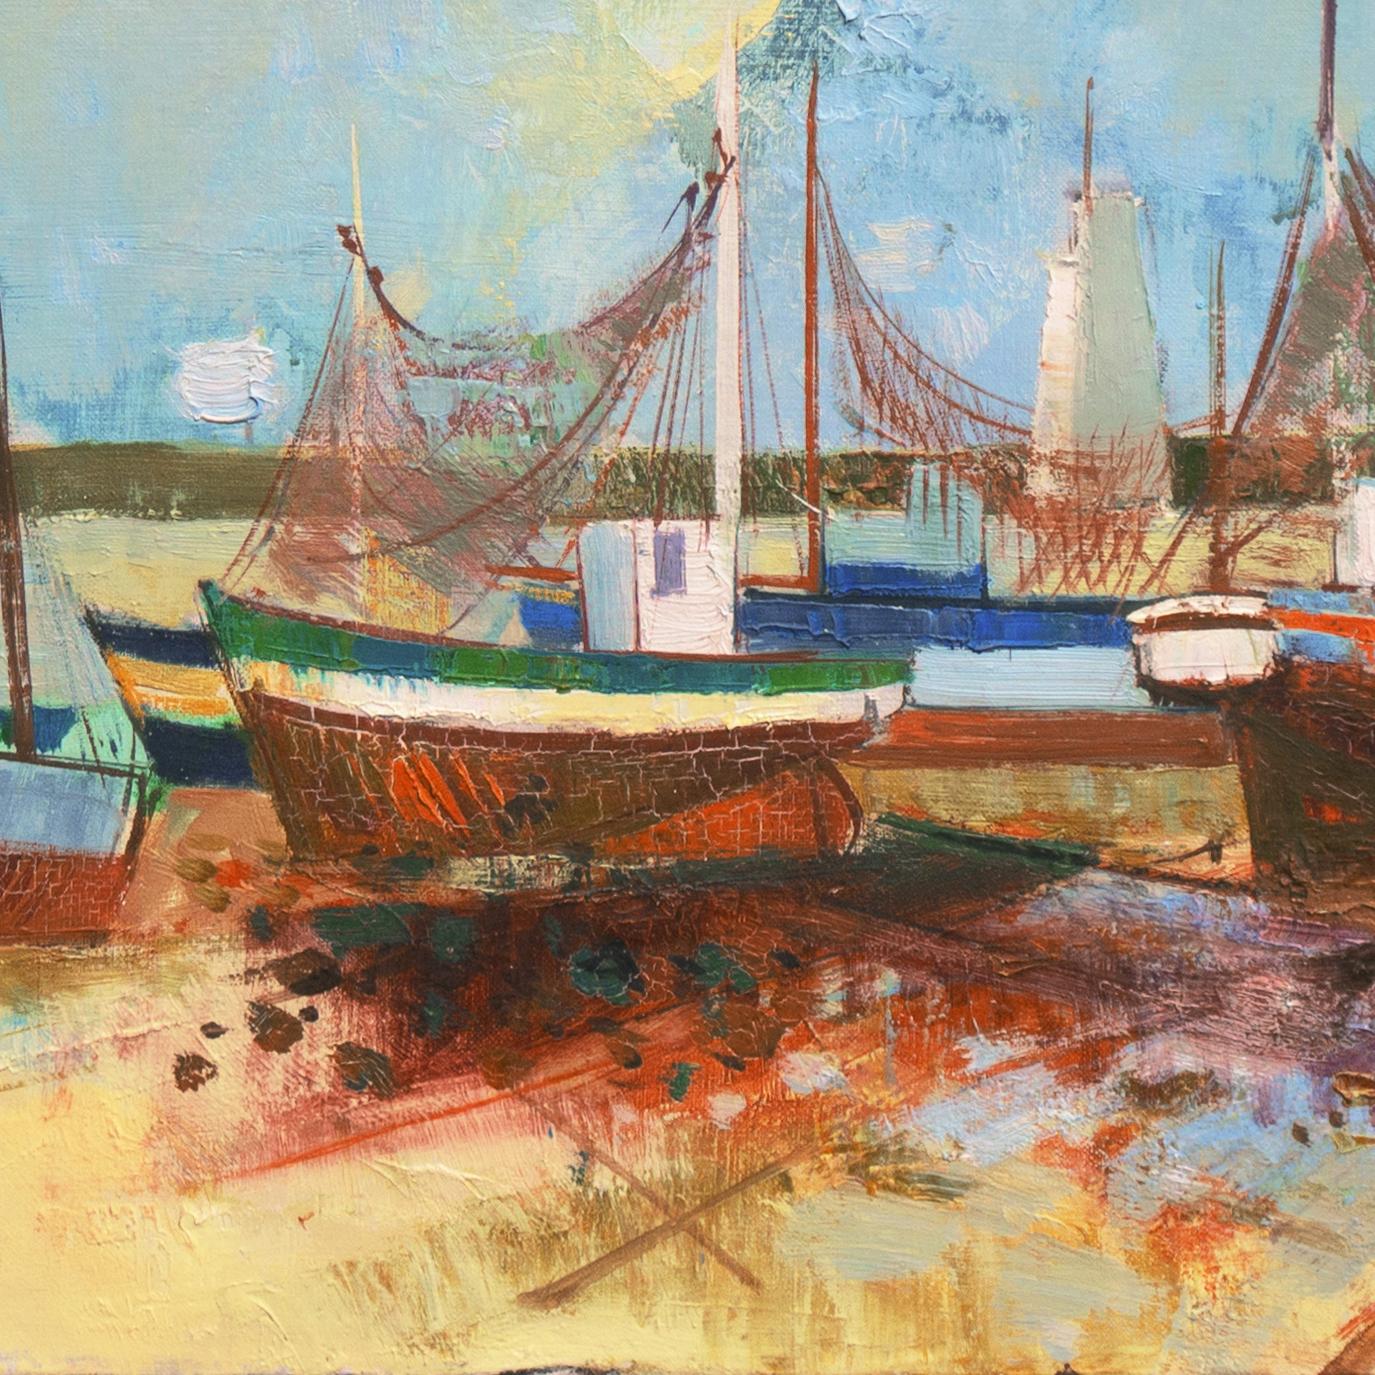 Signed lower right, 'J M Hubert' (French, 20th century) and painted circa 1965.

A mid-century modernist, panoramic view of fishing boats before a sage green light house from this French Post-Impressionist who studied at the Ecole des Beaux Arts in